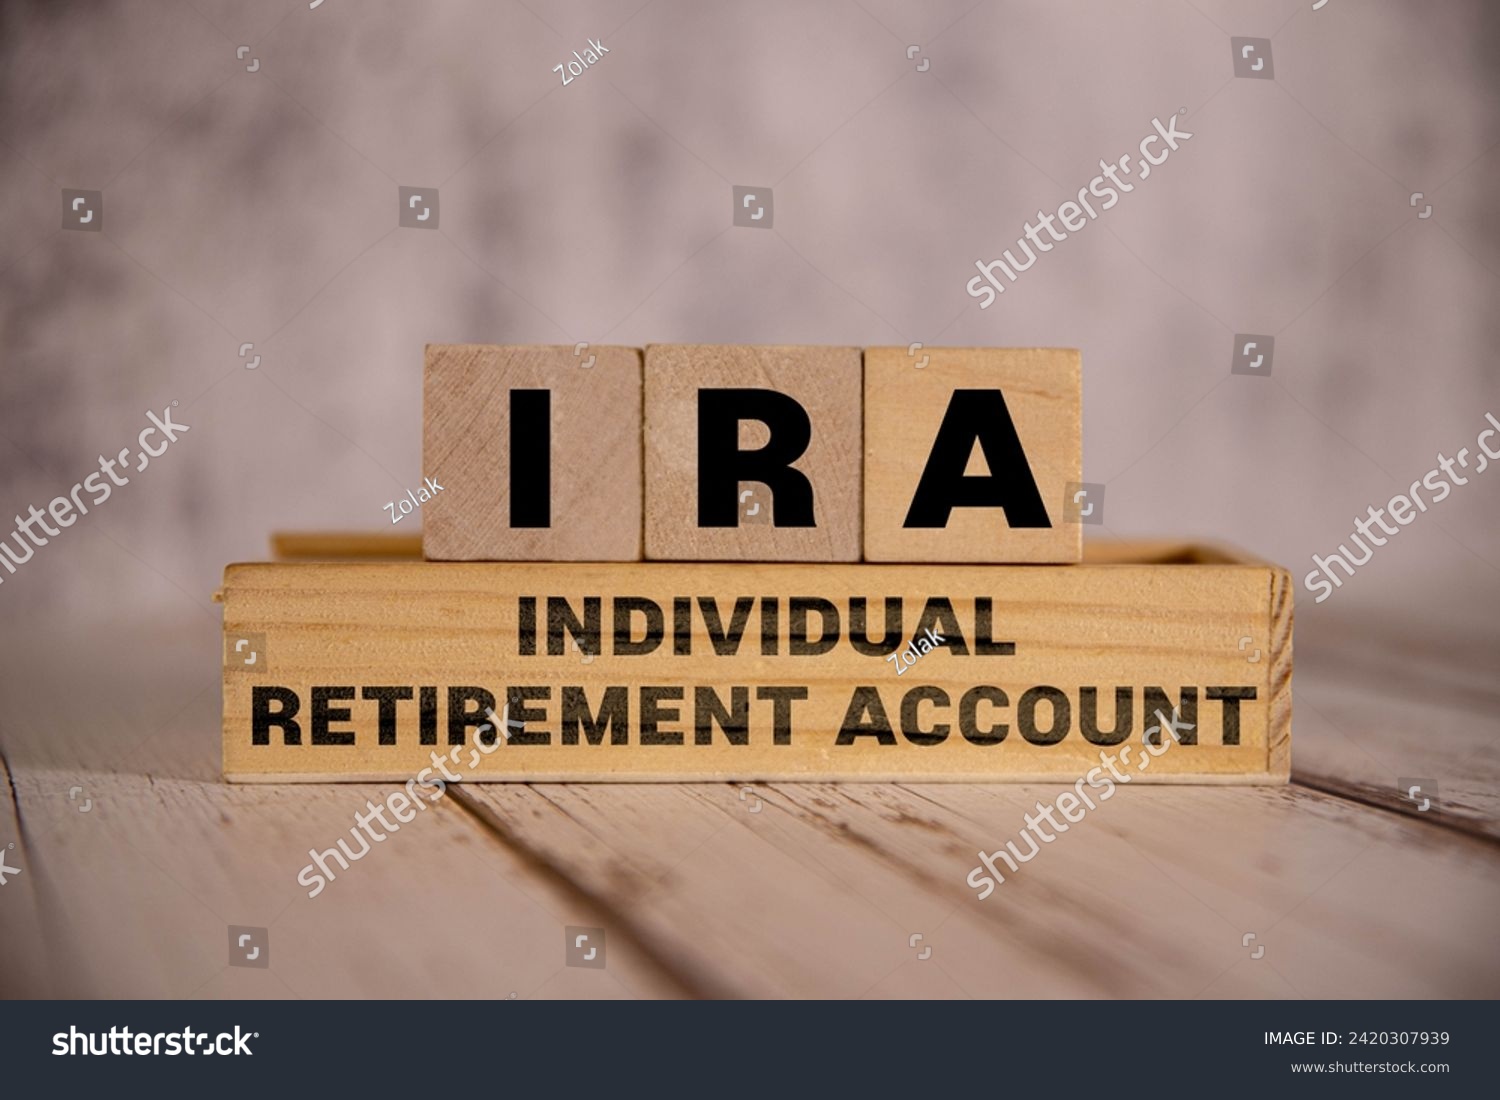 On a bright blue background, light wooden blocks and cubes with the text IRA Individual Retirement Account. #2420307939